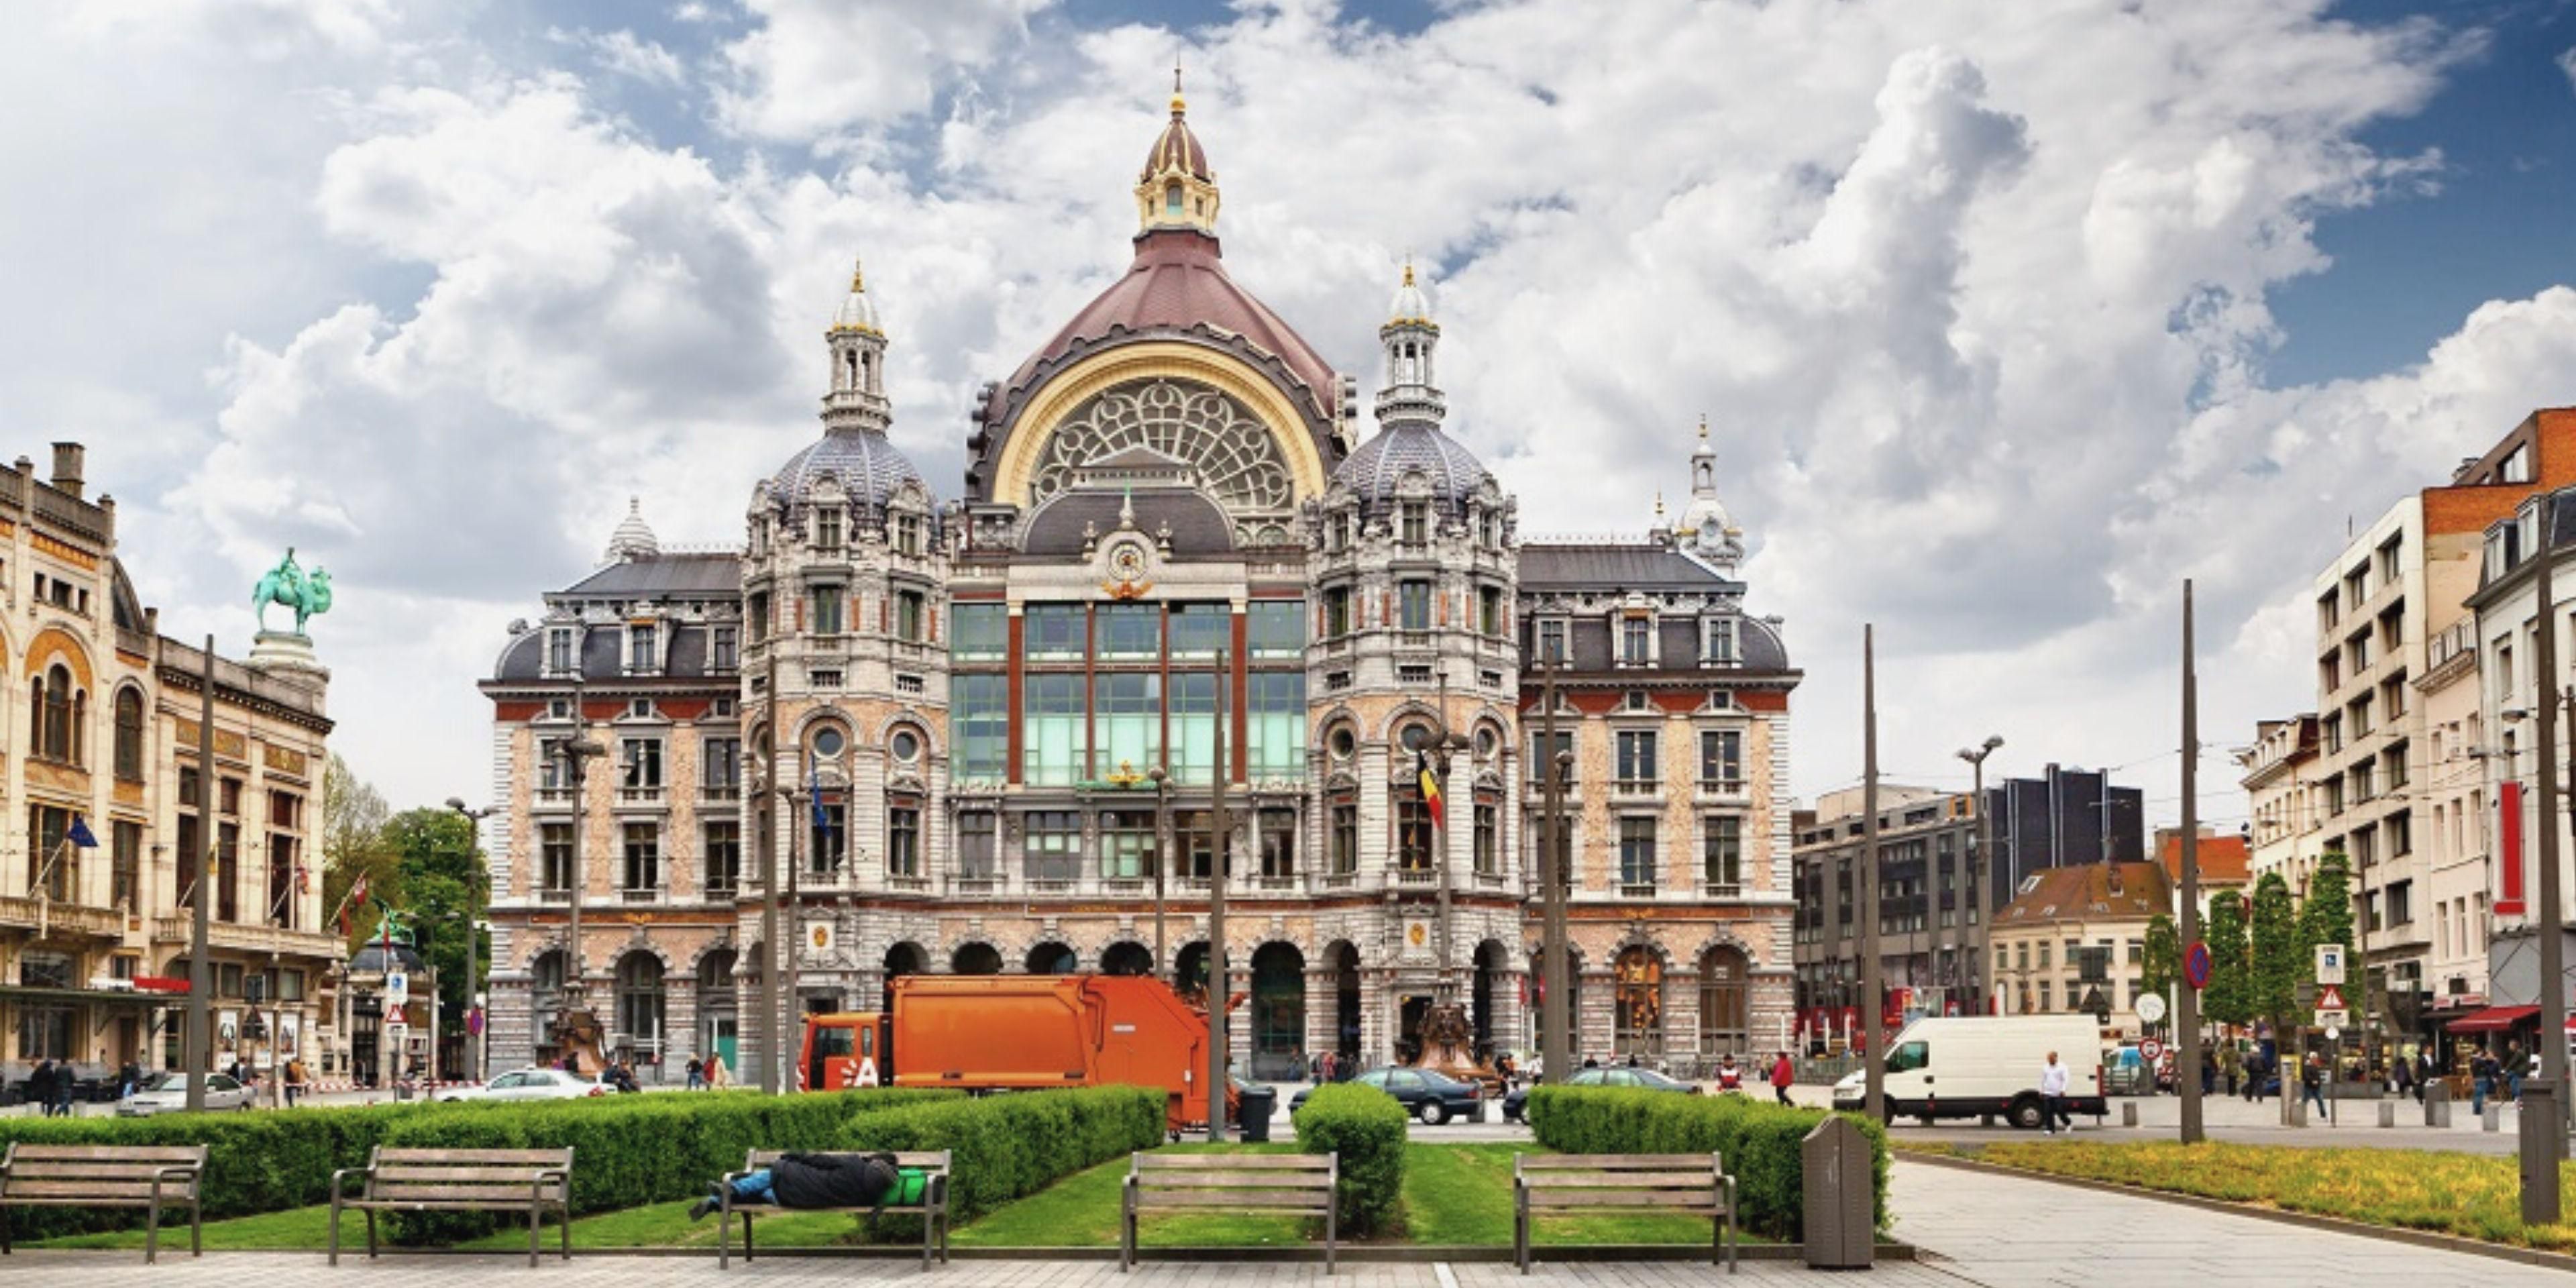 Did you know Antwerp Central station is one the most beautiful stations in the world?
Holiday Inn Express Antwerp – City Centre is located at just 10 minutes of this majestic building and offers countless connections to major European cities and the Brussels International Airport. Definitely worth a visit!